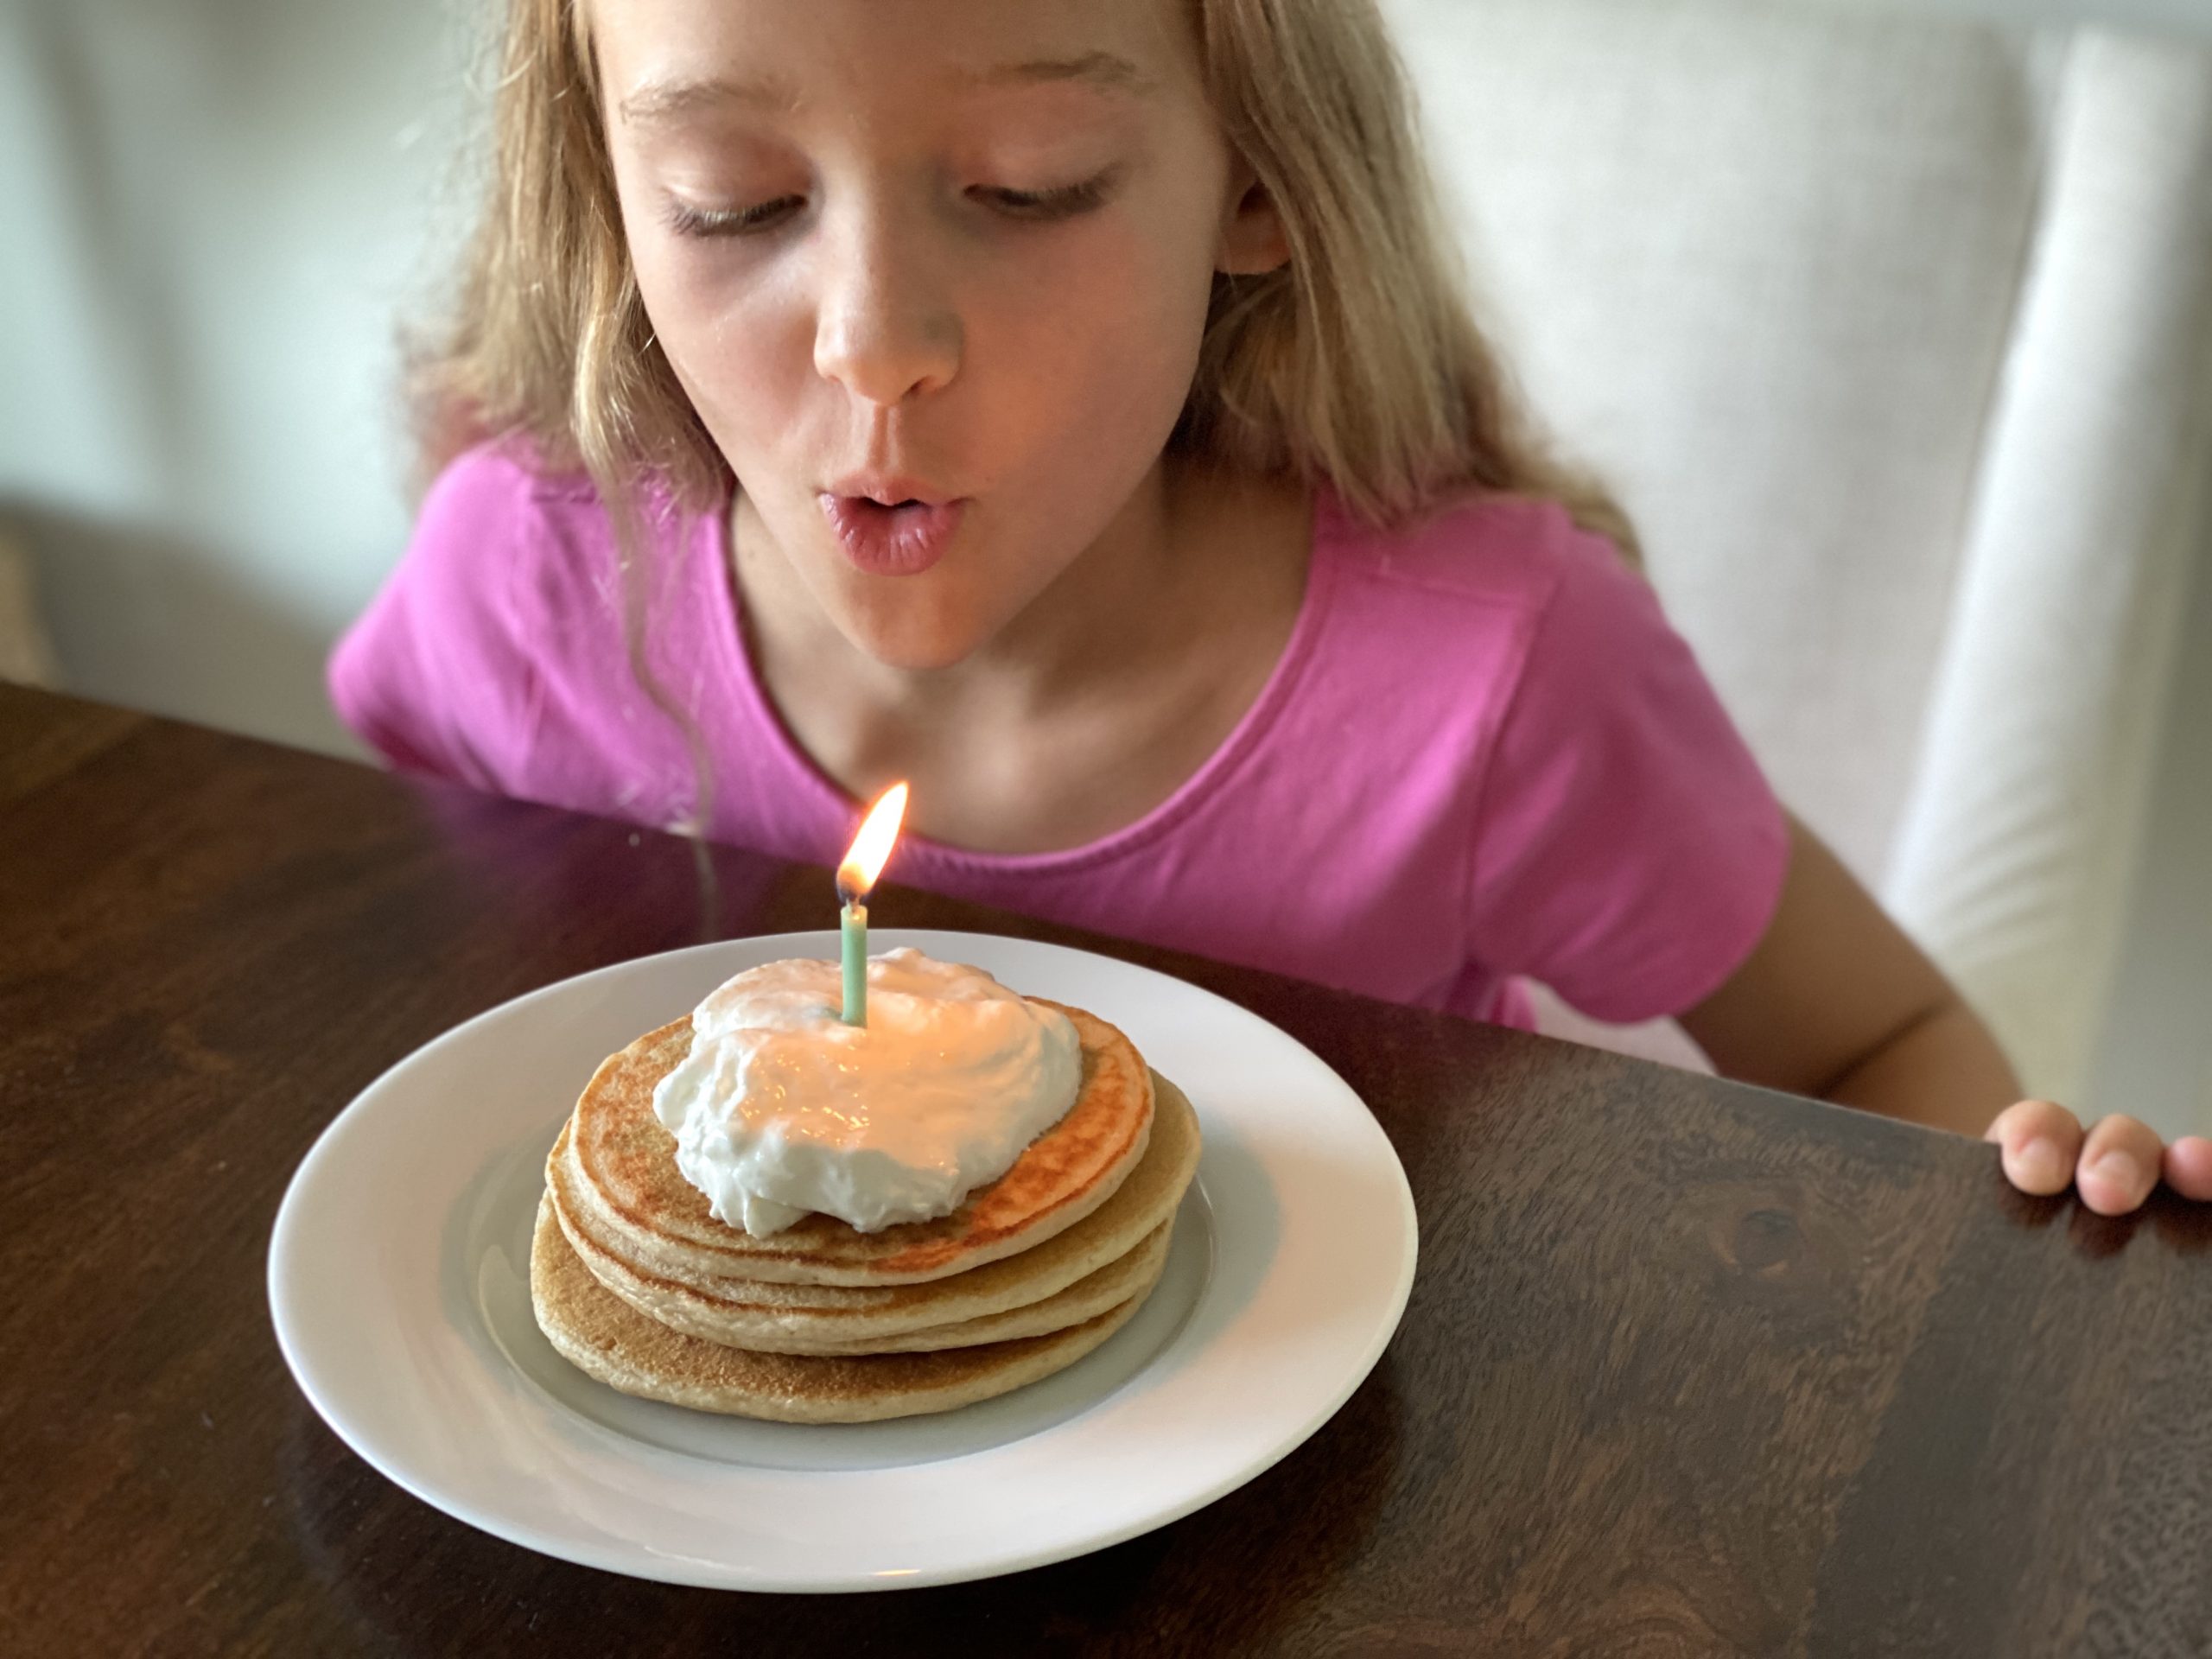 How to decorate a cake to look like a stack of Pancakes - Cake Decorating -  YouTube